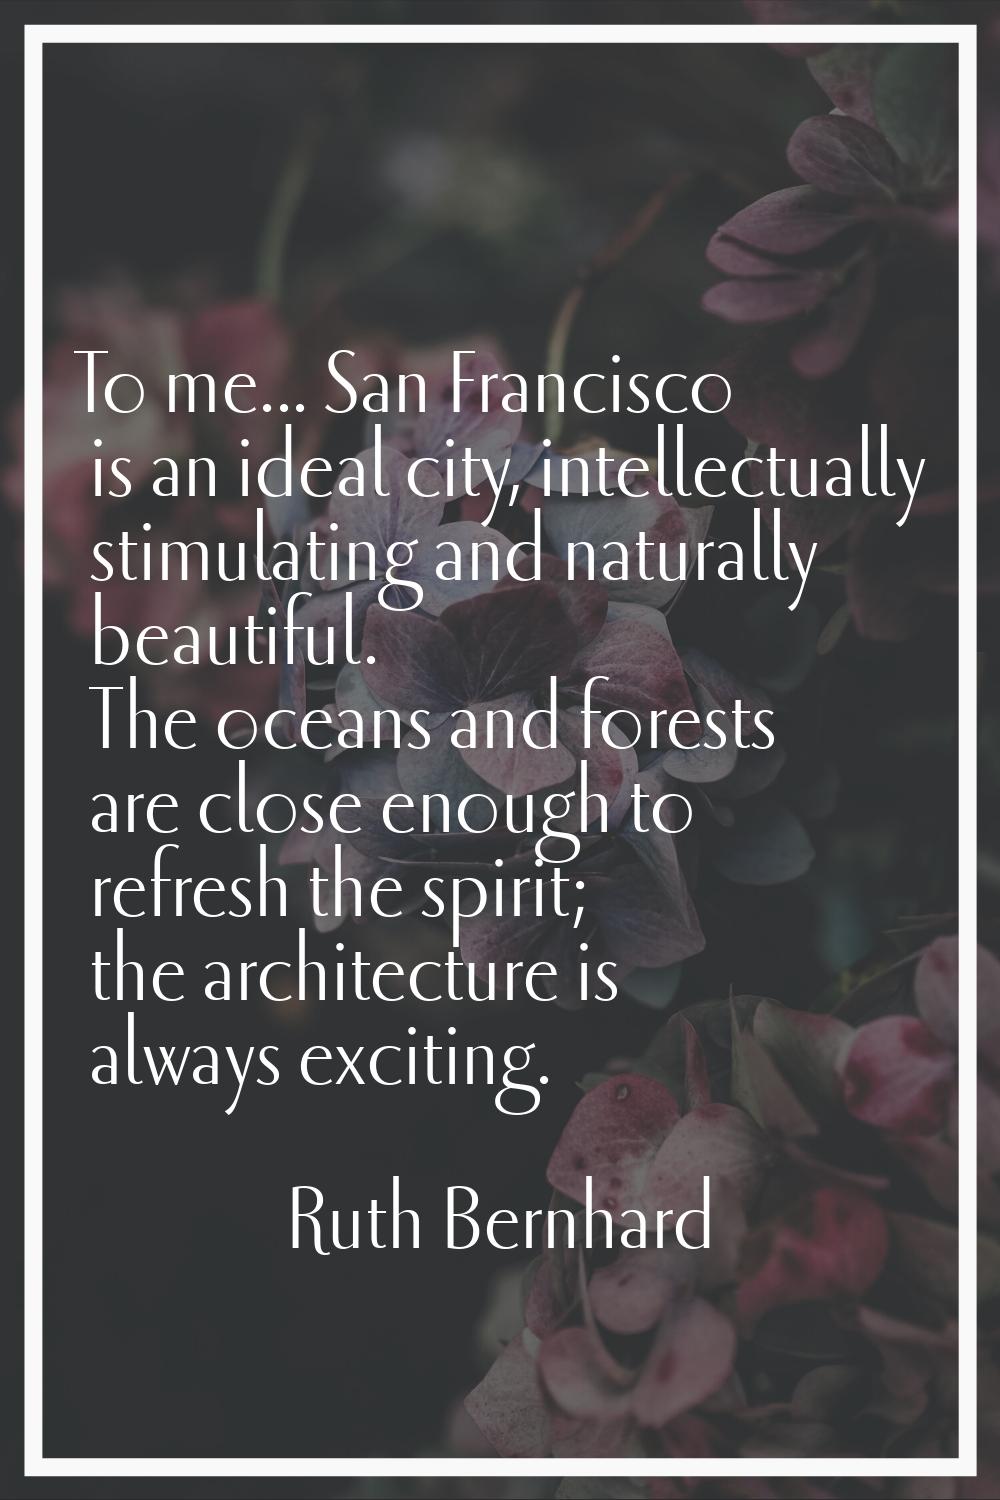 To me... San Francisco is an ideal city, intellectually stimulating and naturally beautiful. The oc